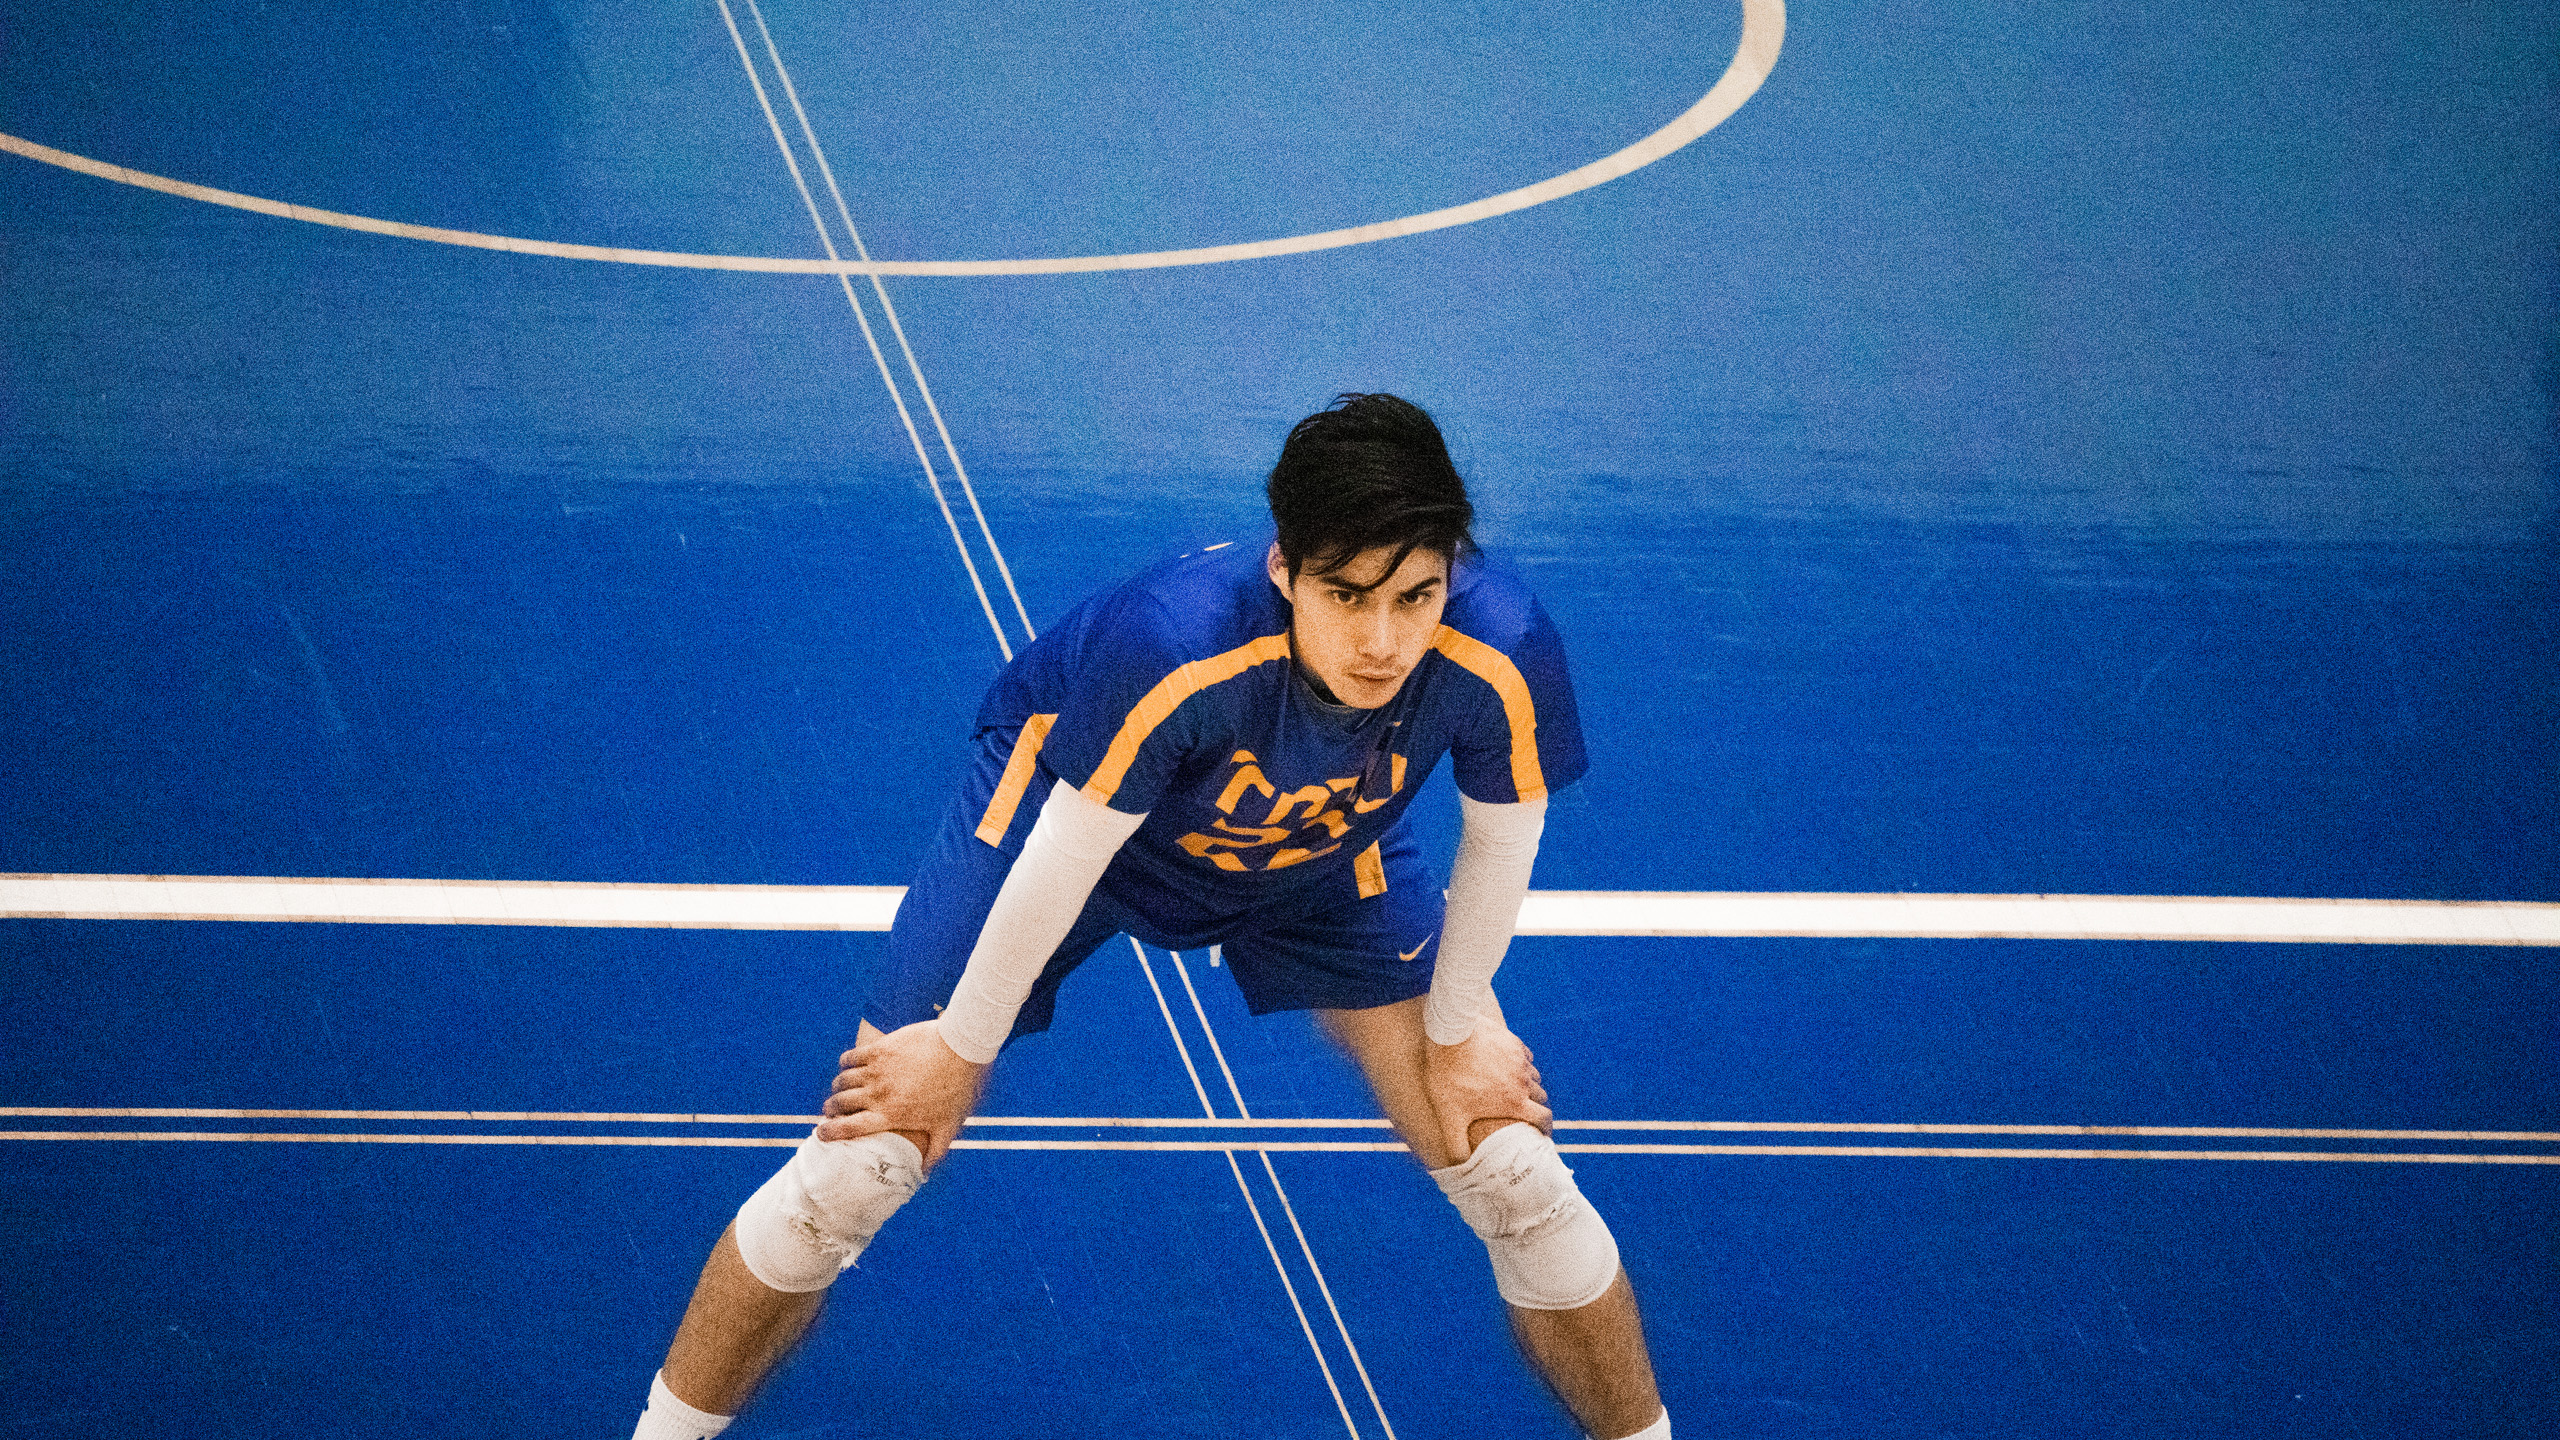 TMU men's volleyball player Lucas Yang hunches over on the court with his hands on his knees